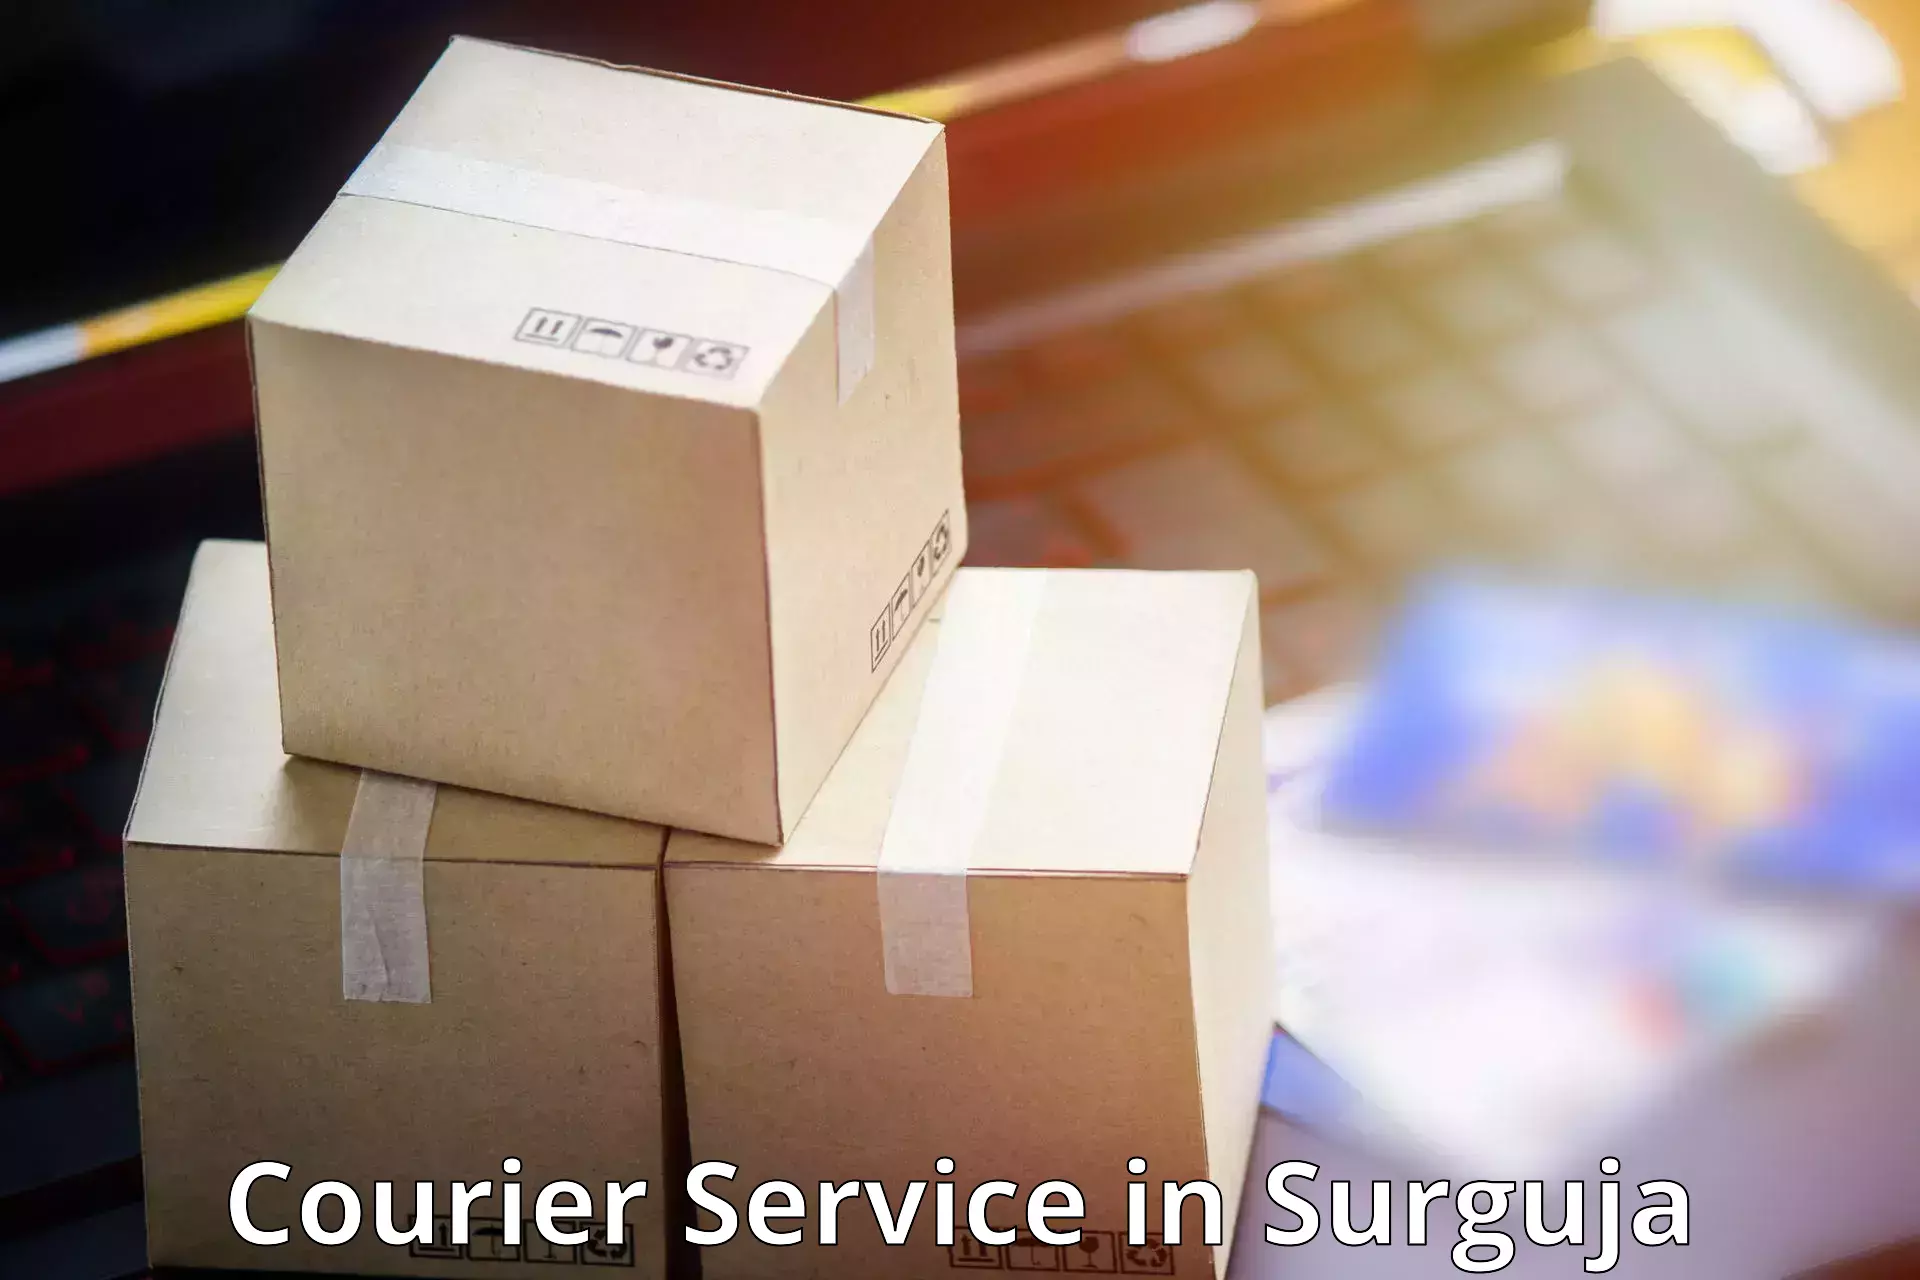 Express package transport in Surguja